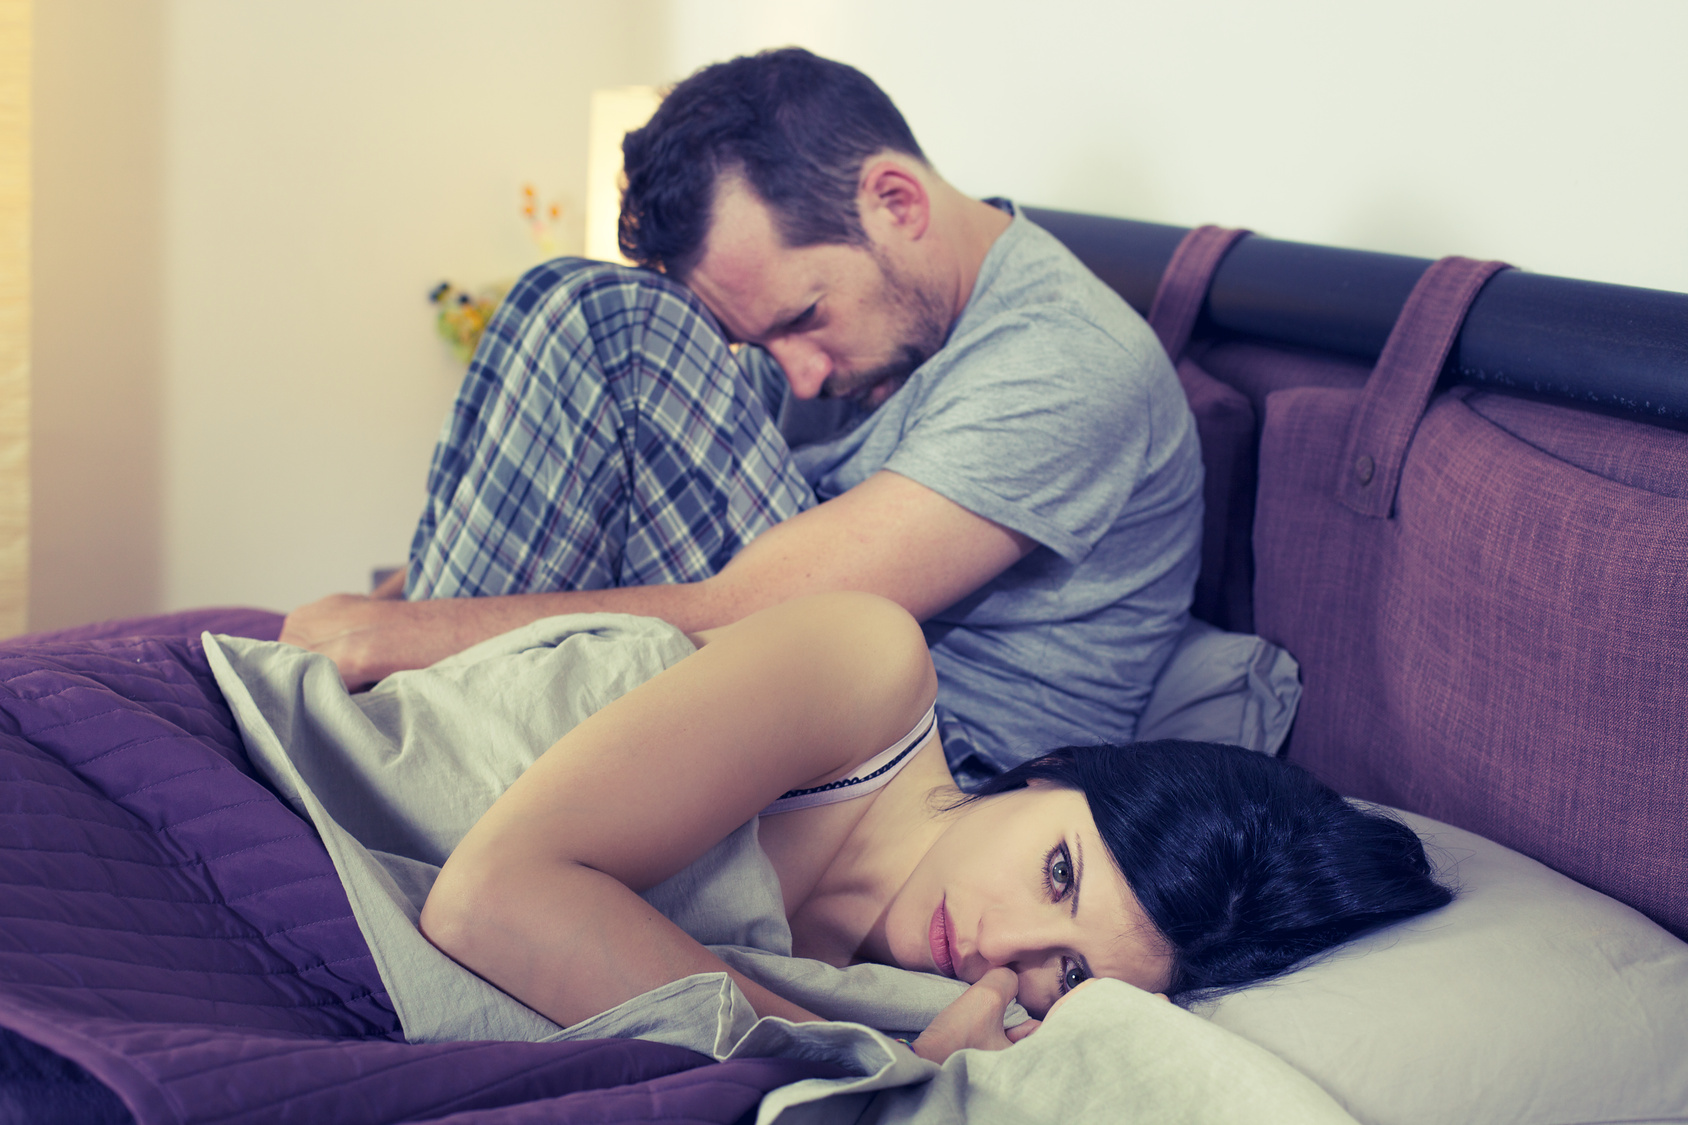 Sad couple in crisis at home in bed